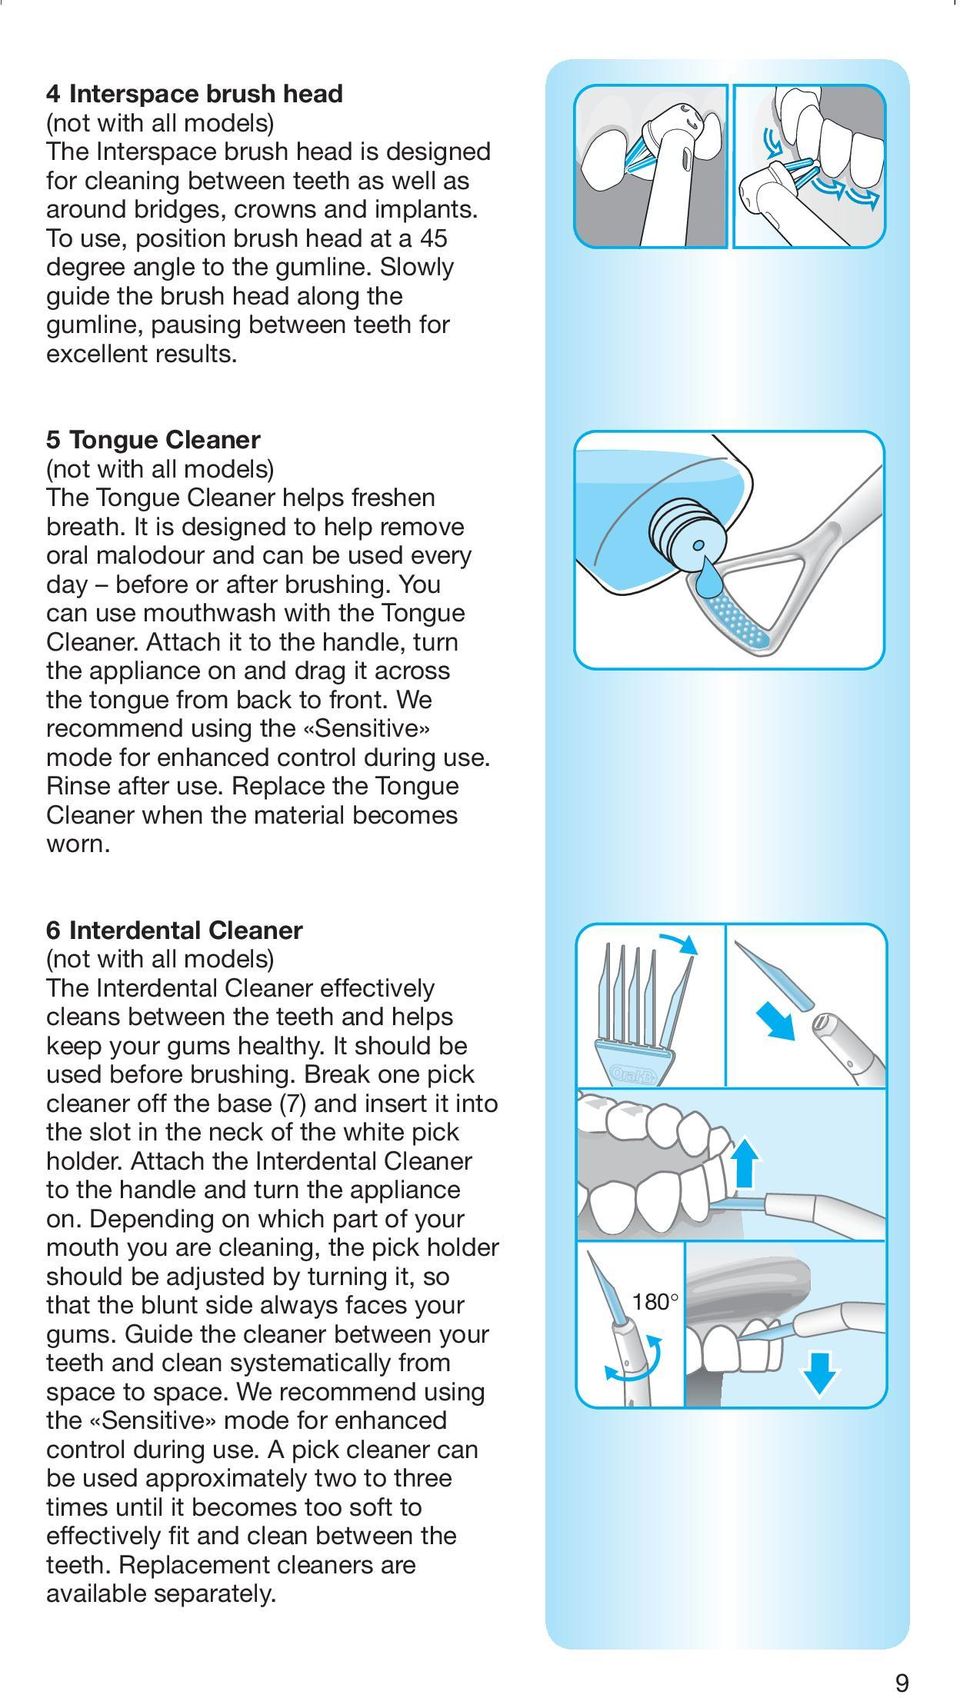 5 Tongue Cleaner (not with all models) The Tongue Cleaner helps freshen breath. It is designed to help remove oral malodour and can be used every day before or after brushing.